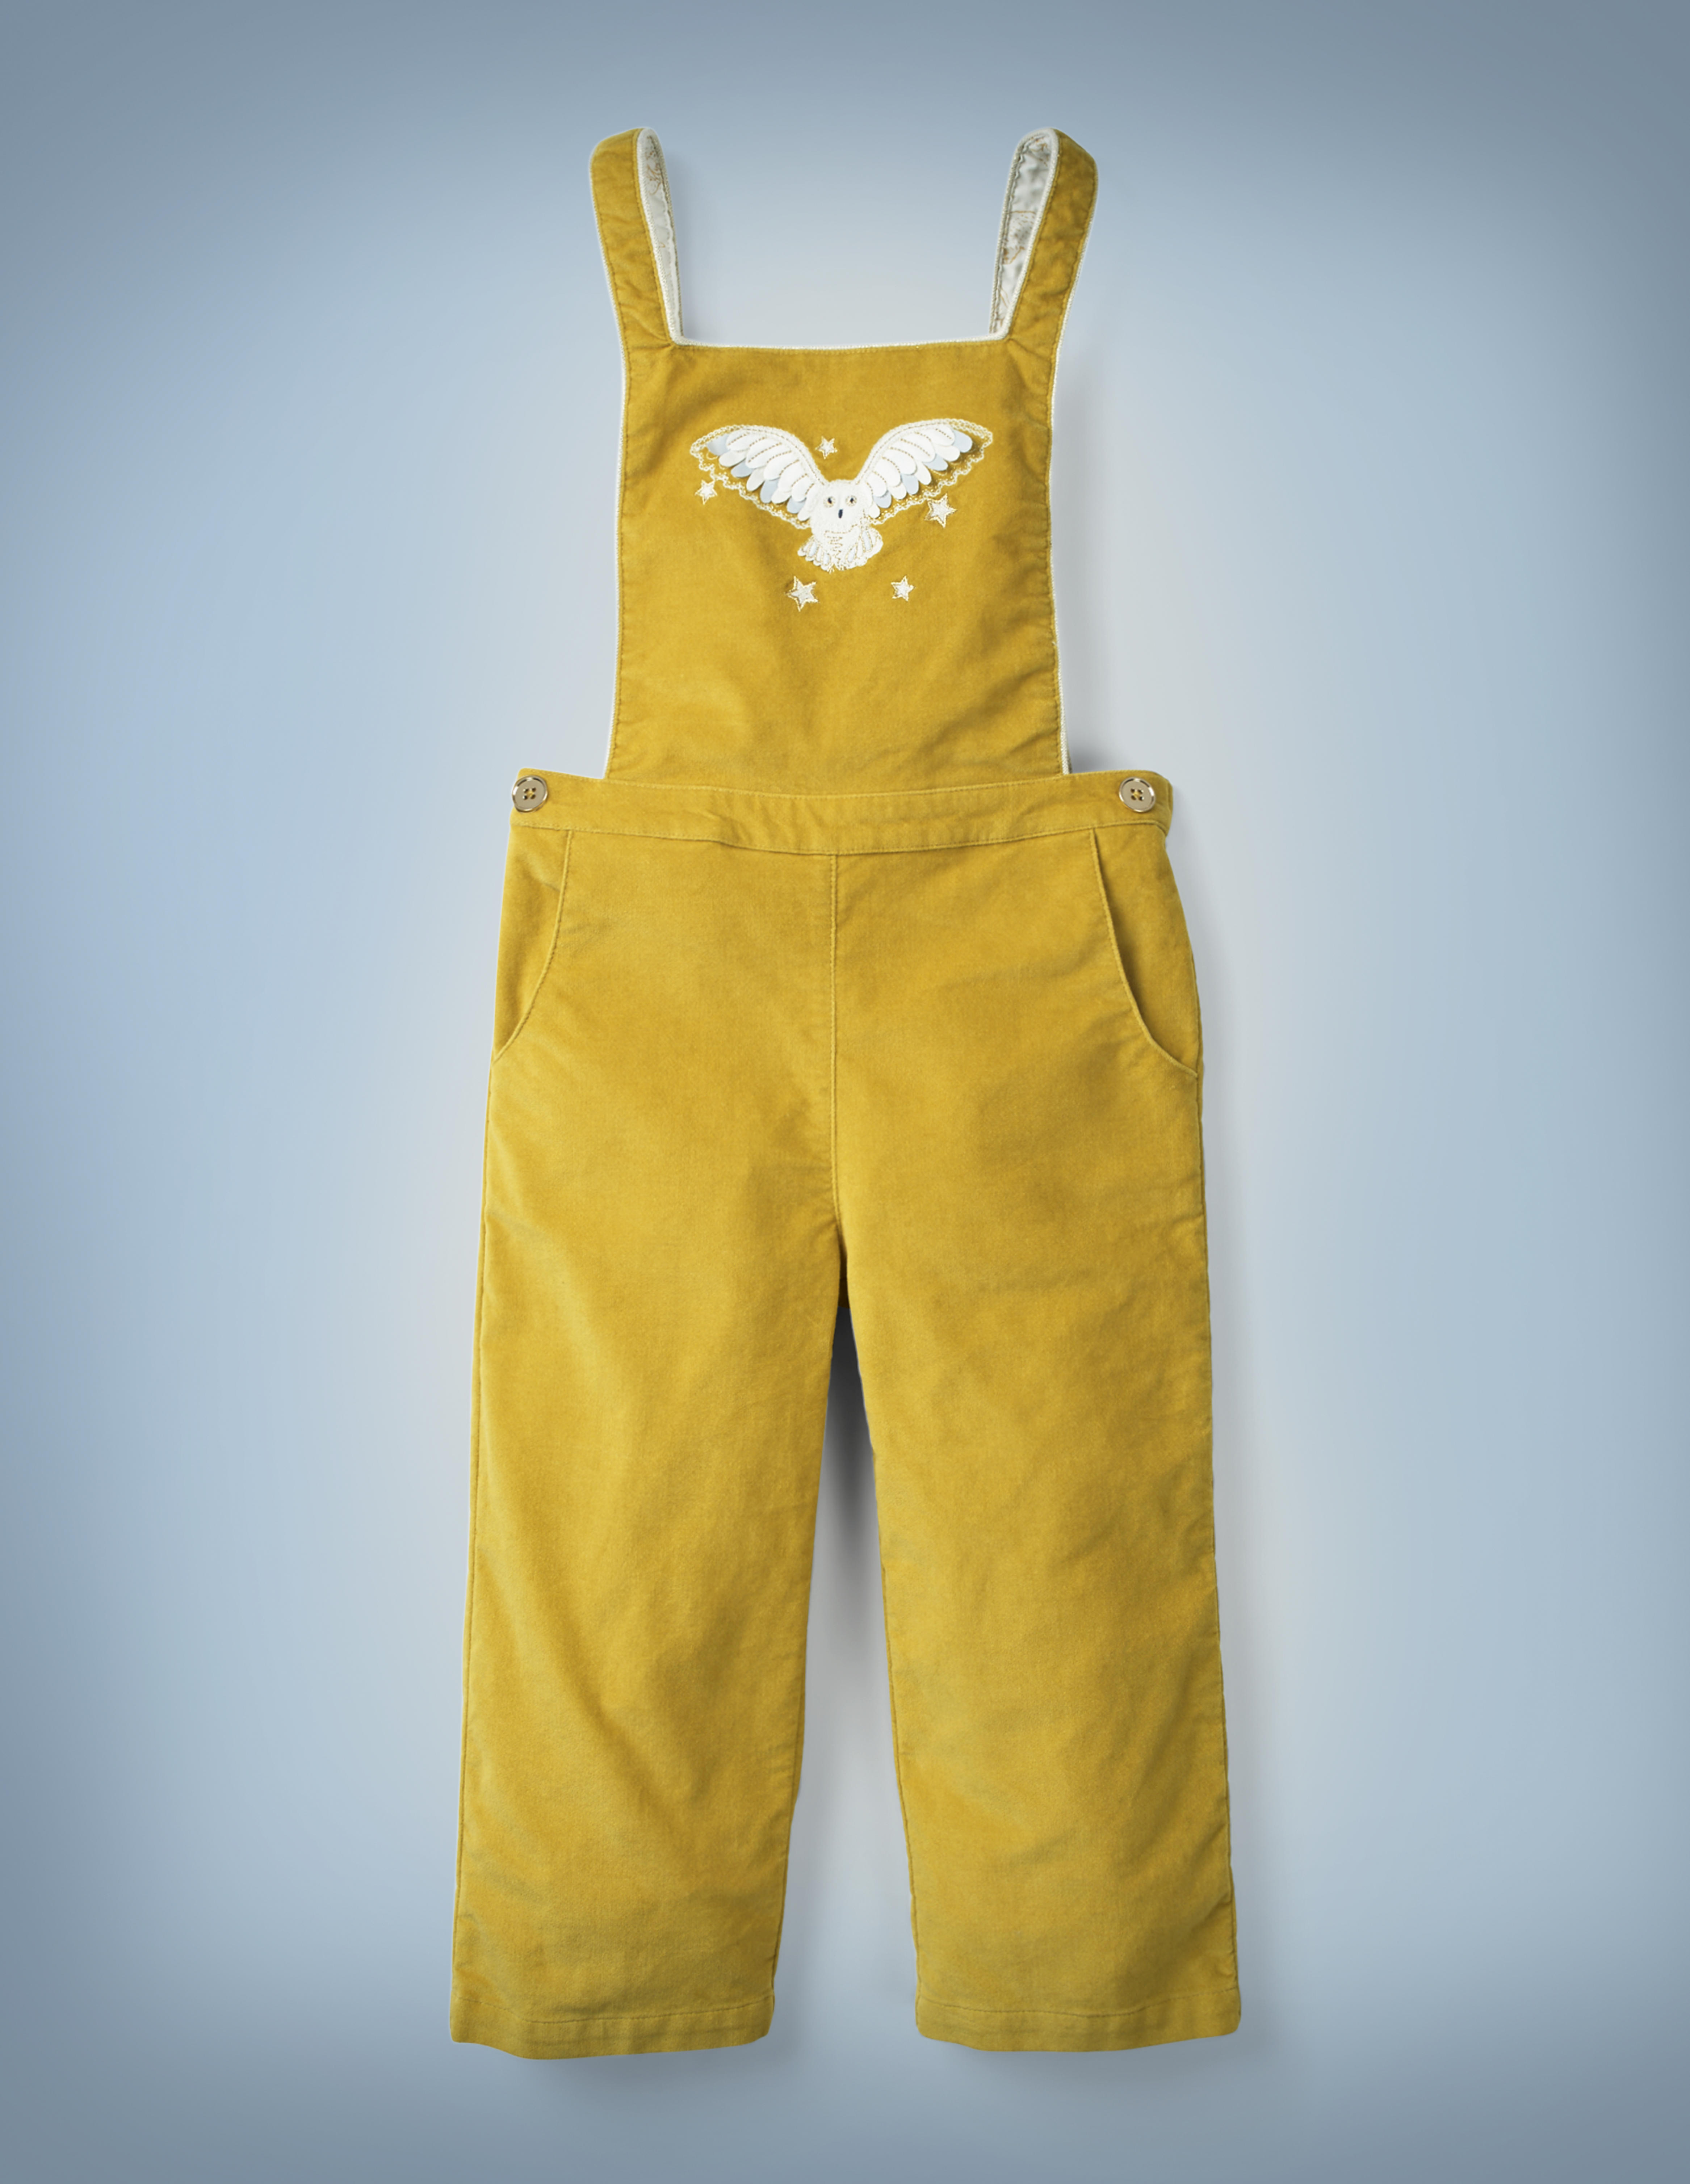 The Mini Boden Hedwig Dungarees in mustard yellow feature a design of Harry Potter’s beloved owl flying through the stars on the breast of the overalls. They retail at £40.